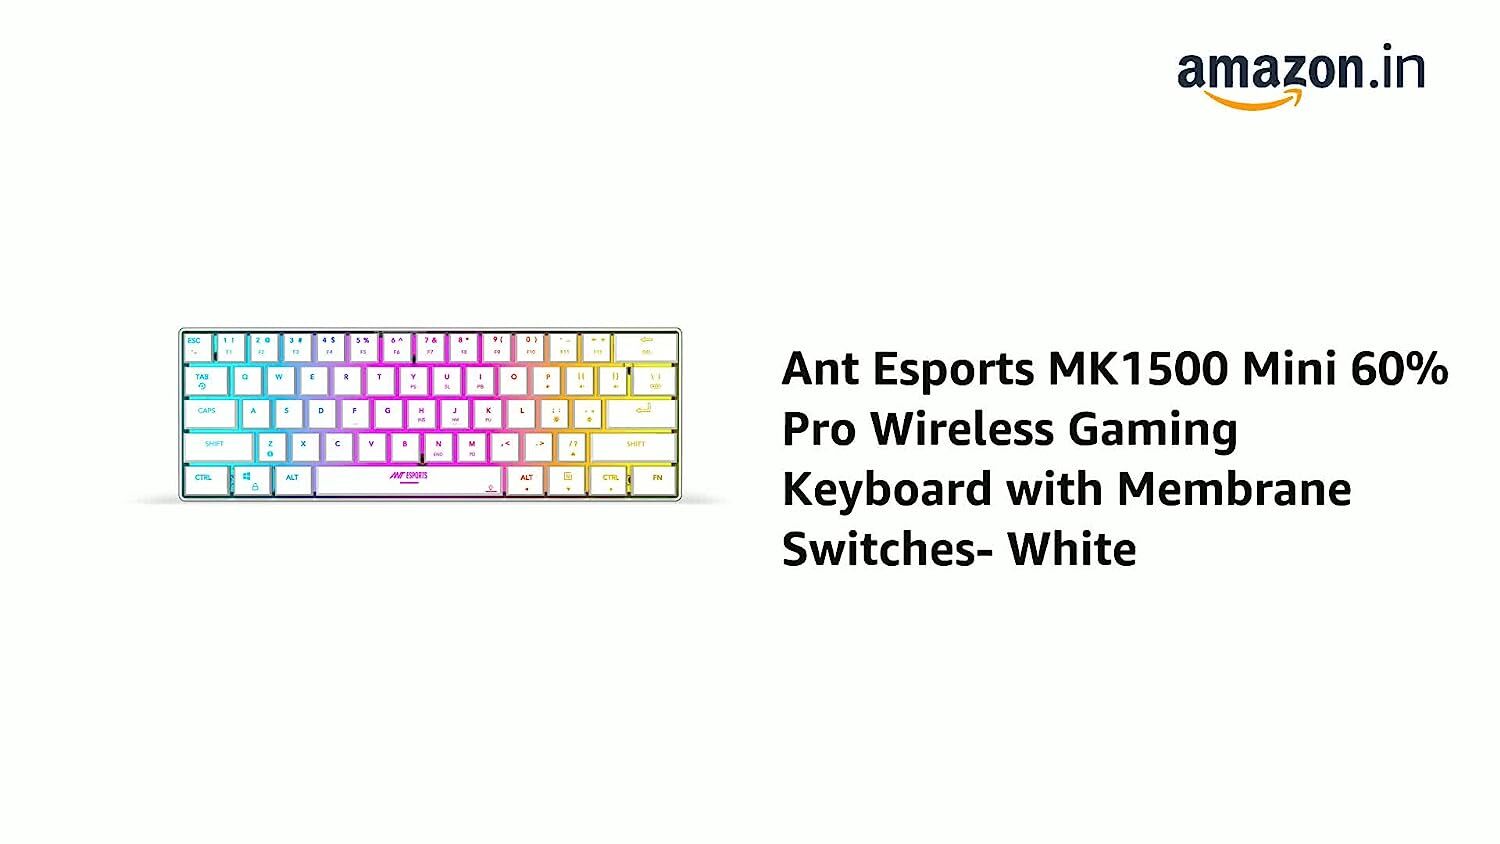 Ant Esports MK1500 Mini 60 Pro RGB  Wireless Gaming Keyboard with Membrane Switches for PC / Mobile / Tablets / Laptop / TVs- White-M00000001352